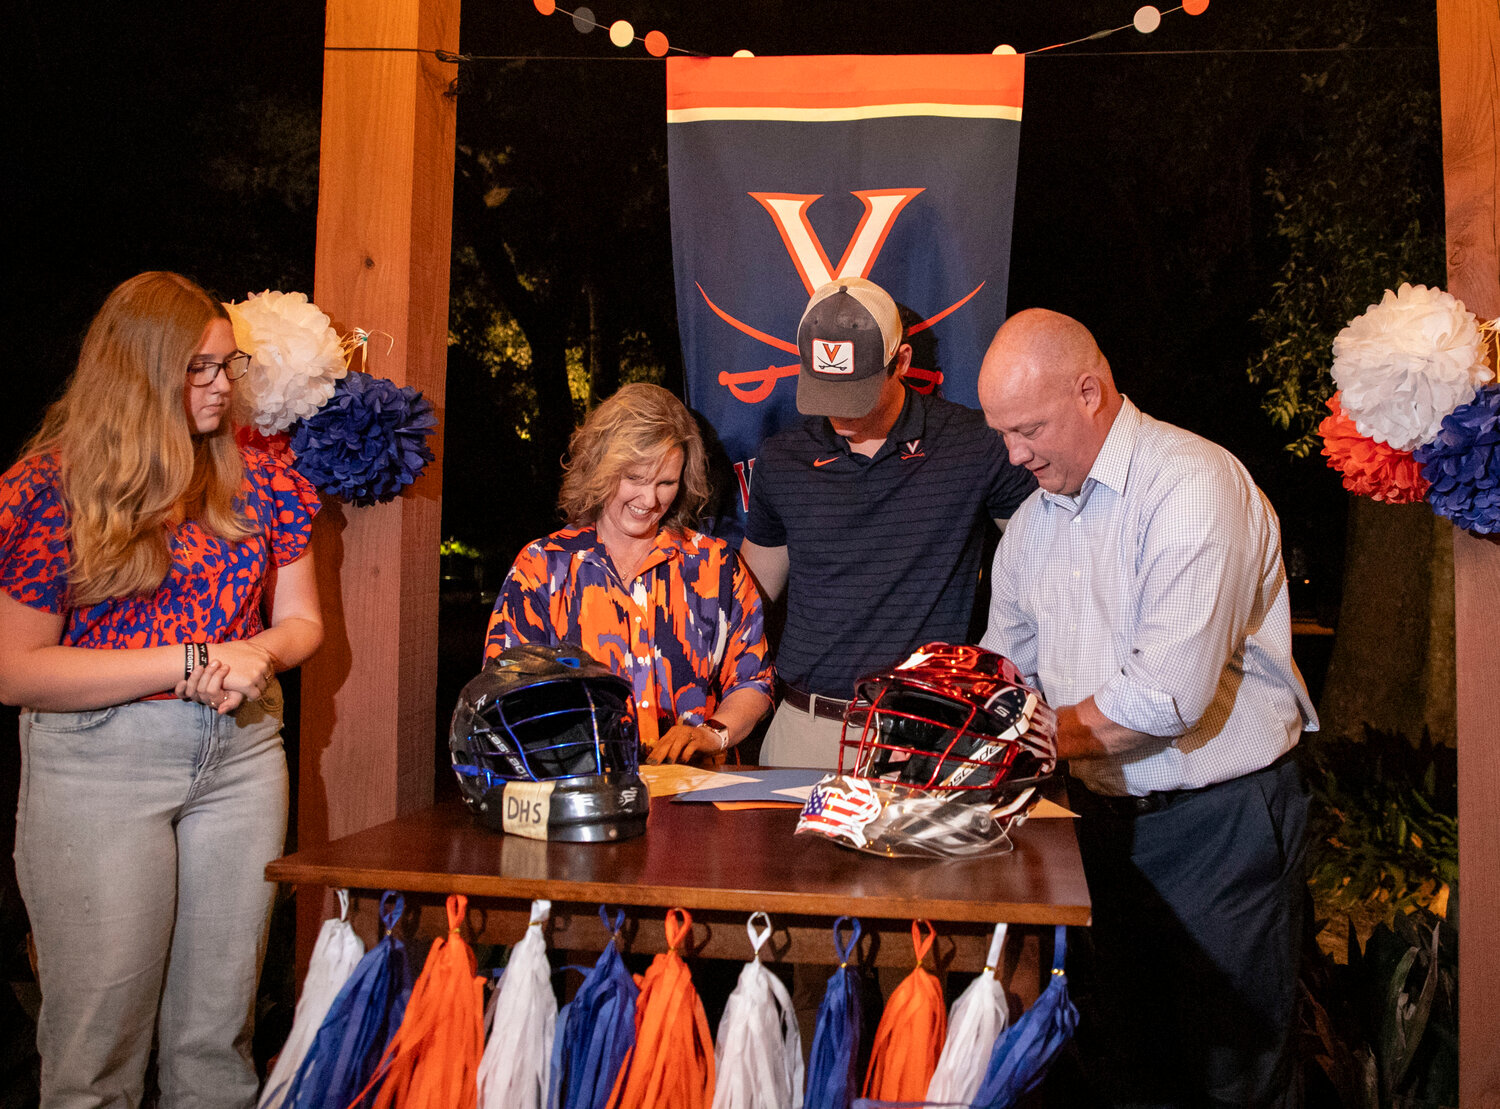 Troy Capstraw’s commitment to the Virginia Cavalier lacrosse program was made official on Wednesday, Nov. 8, during a signing ceremony in Daphne. One of the top goalie prospects in the nation, Capstraw announced his commitment to Virginia on Sept. 8, 2022.